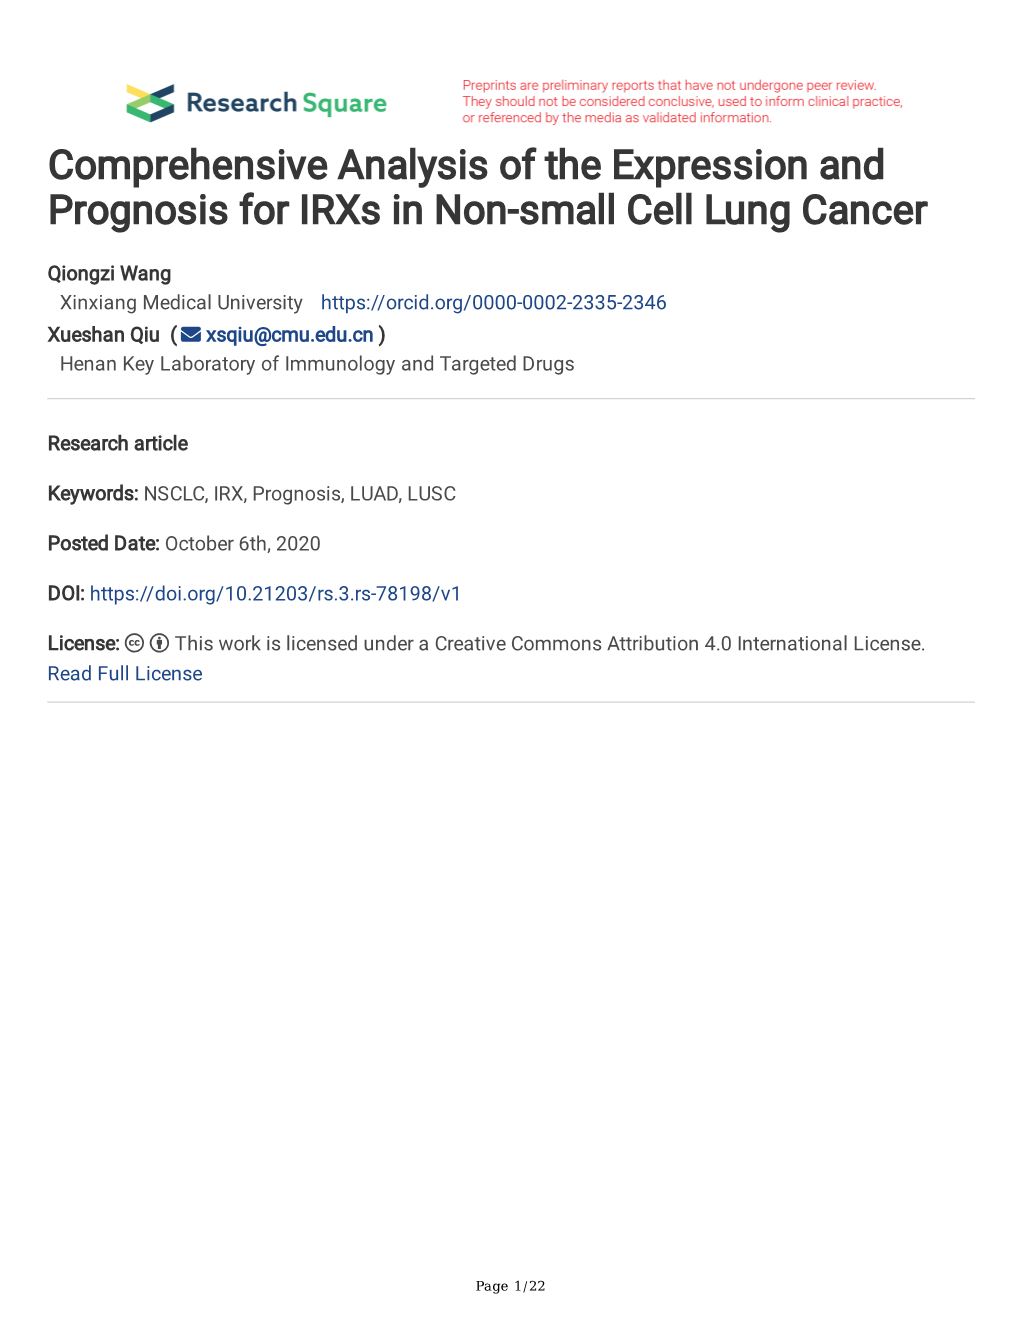 Comprehensive Analysis of the Expression and Prognosis for Irxs in Non-Small Cell Lung Cancer